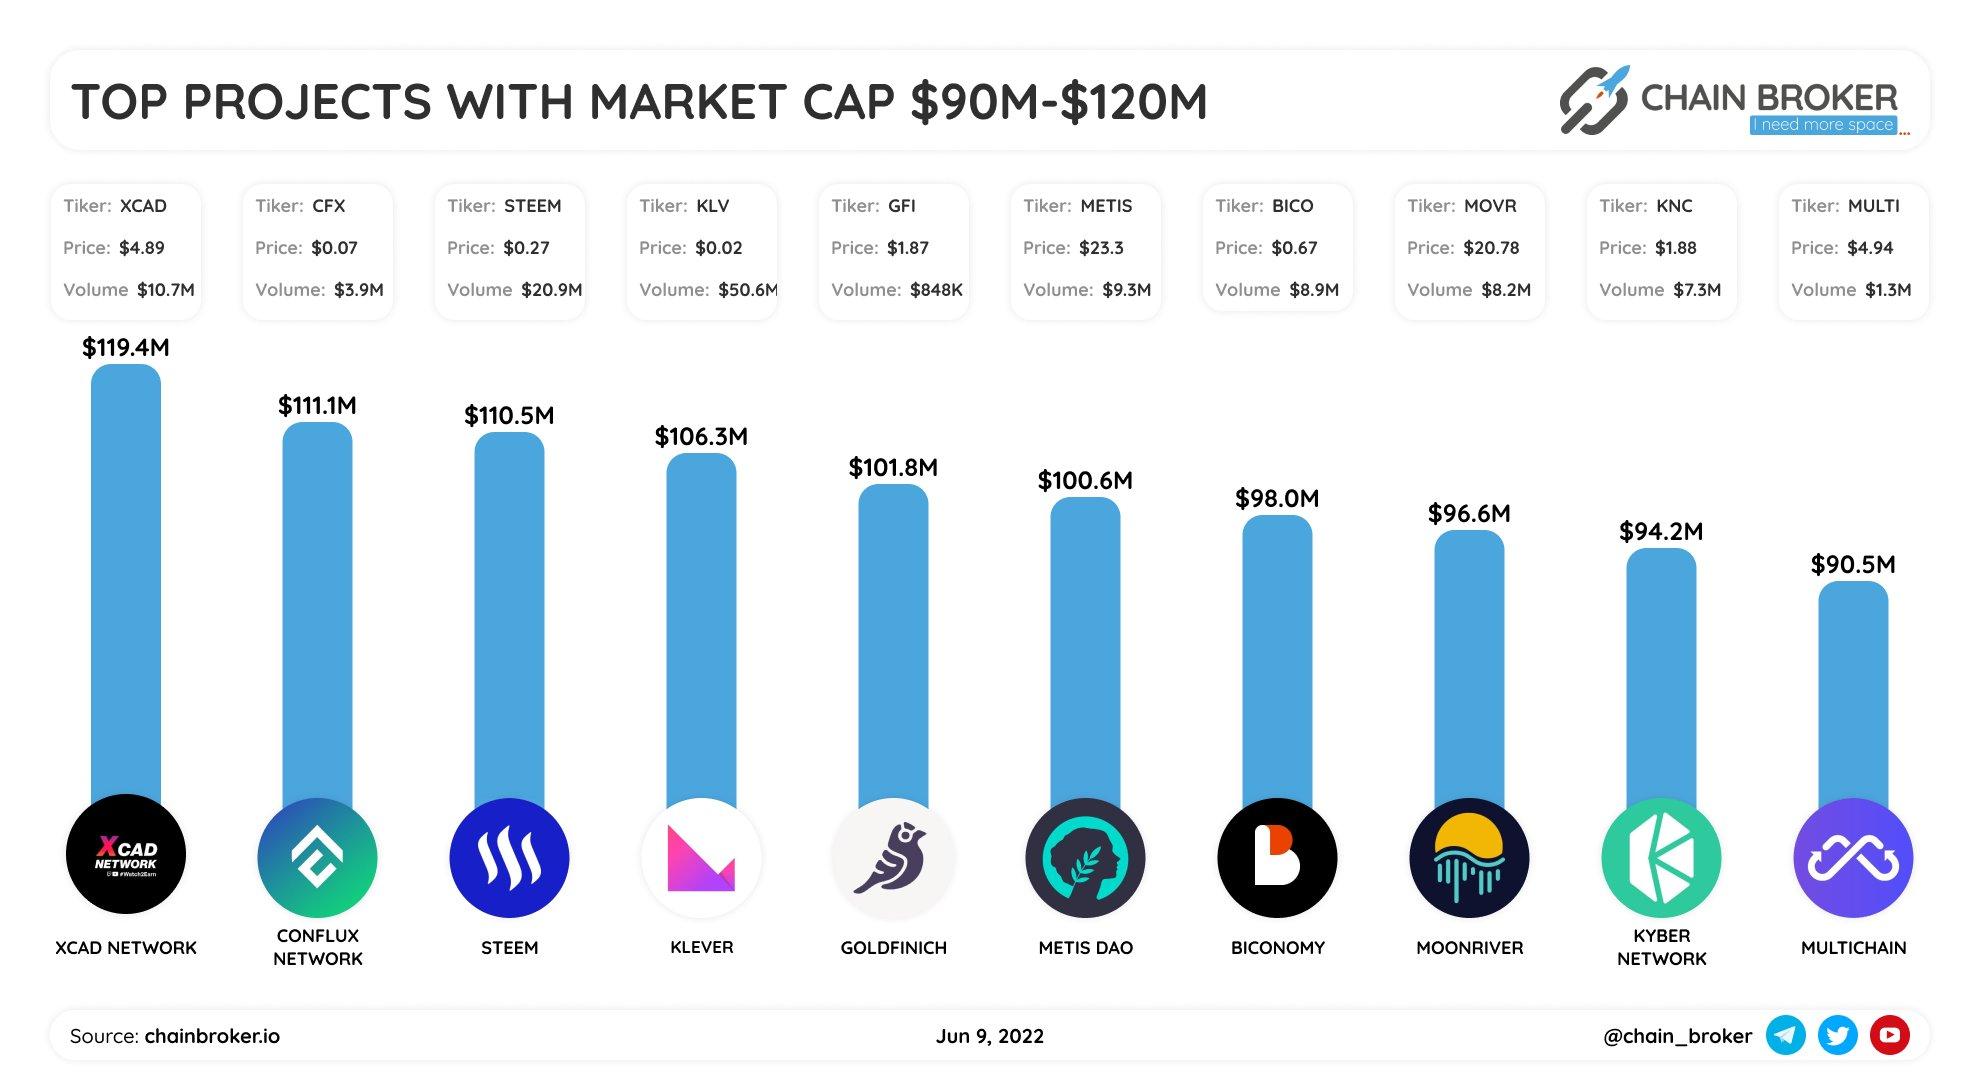 Top projects with Market Cap $90M - $120M